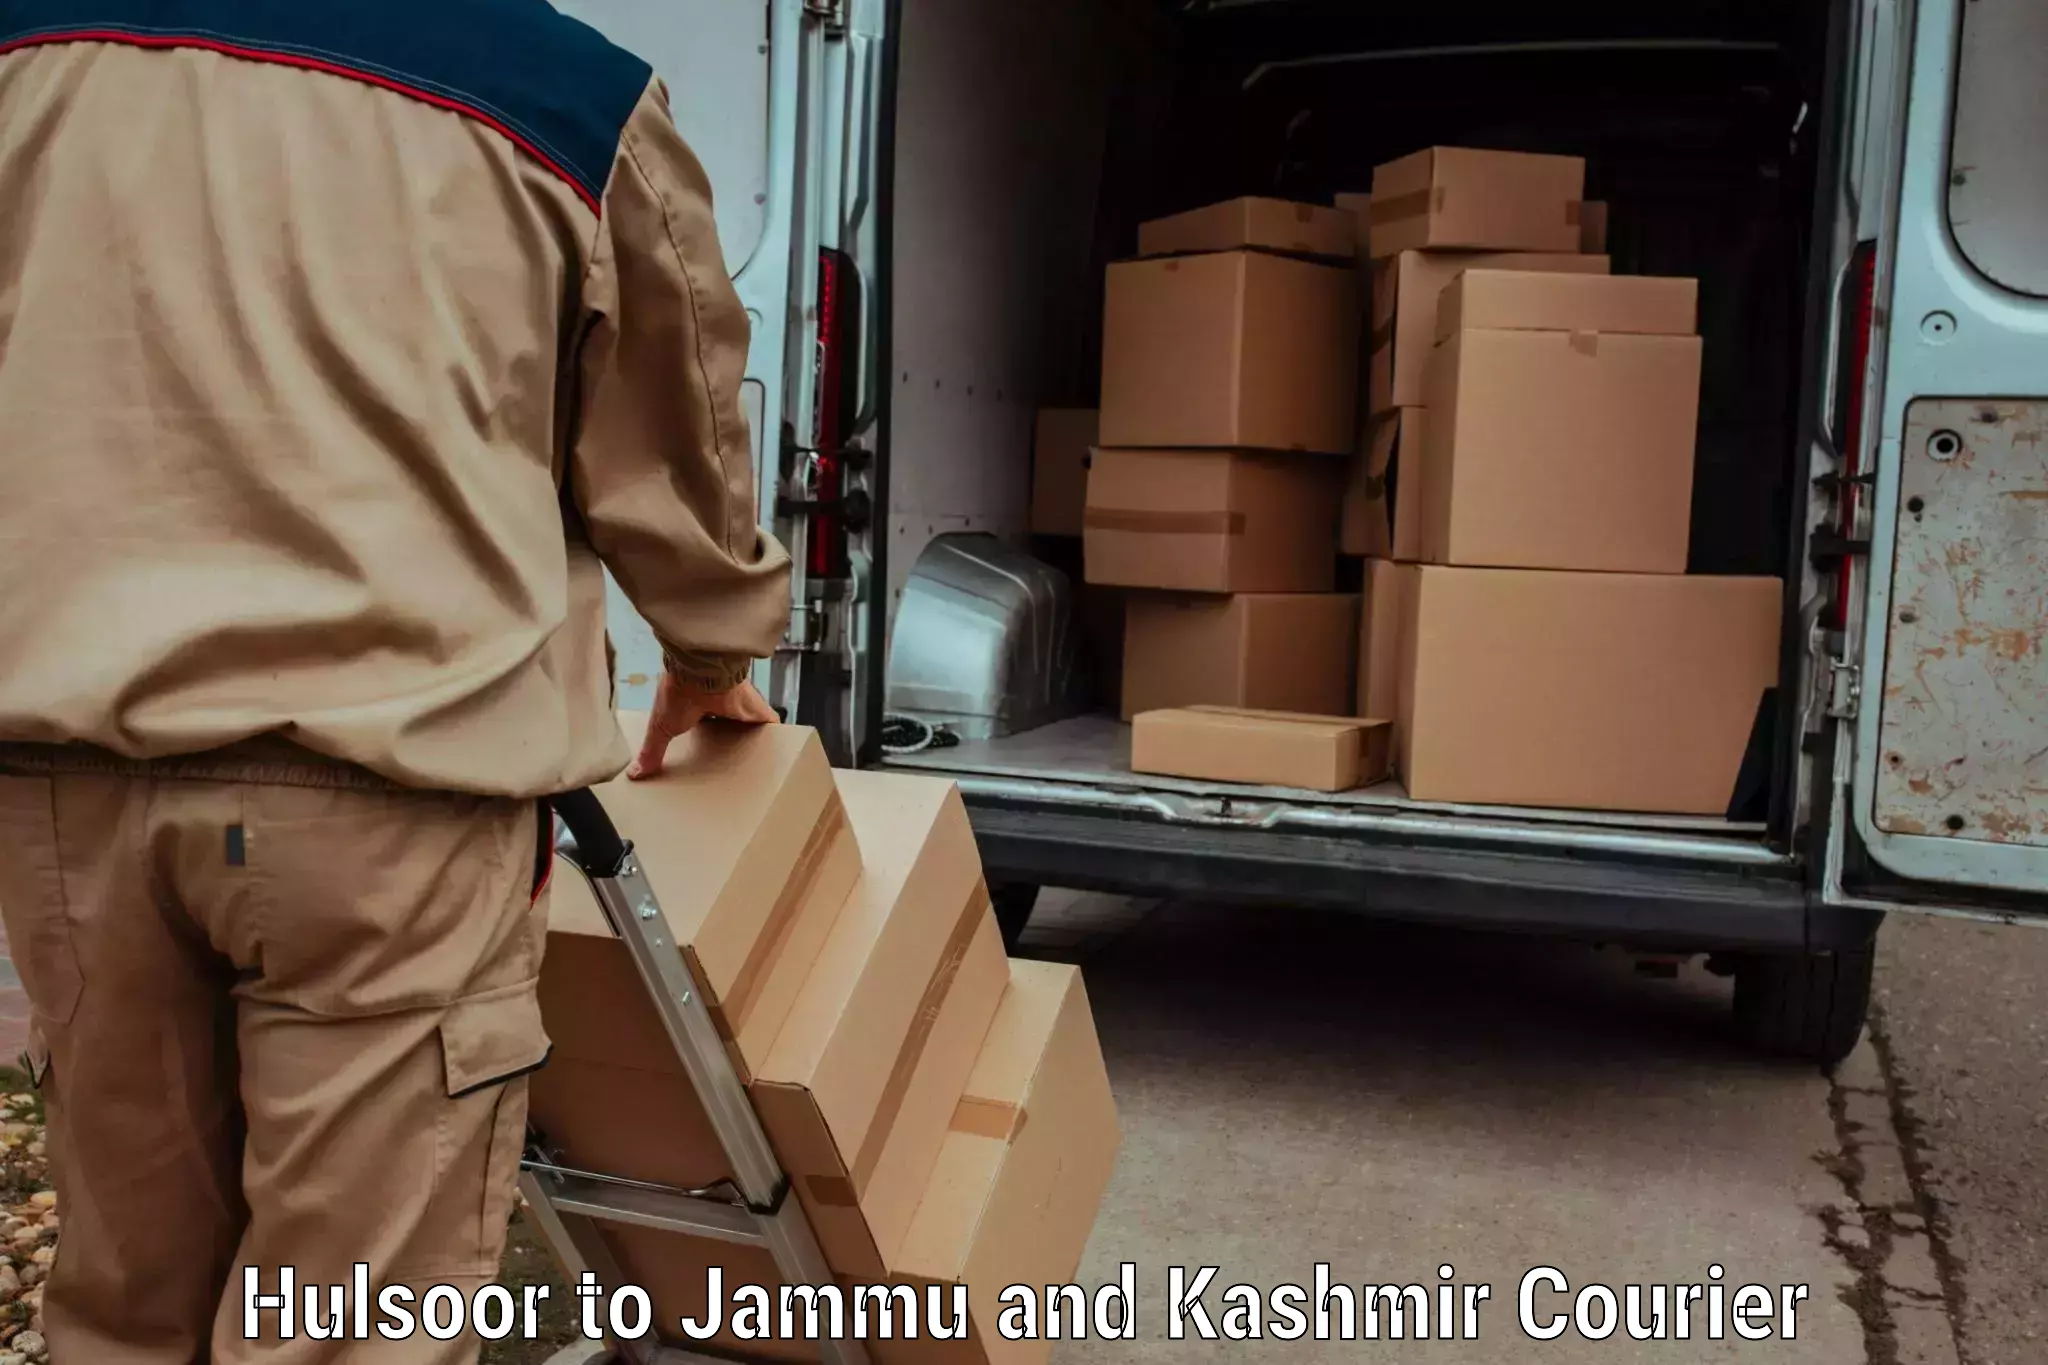 Reliable courier service Hulsoor to Kargil